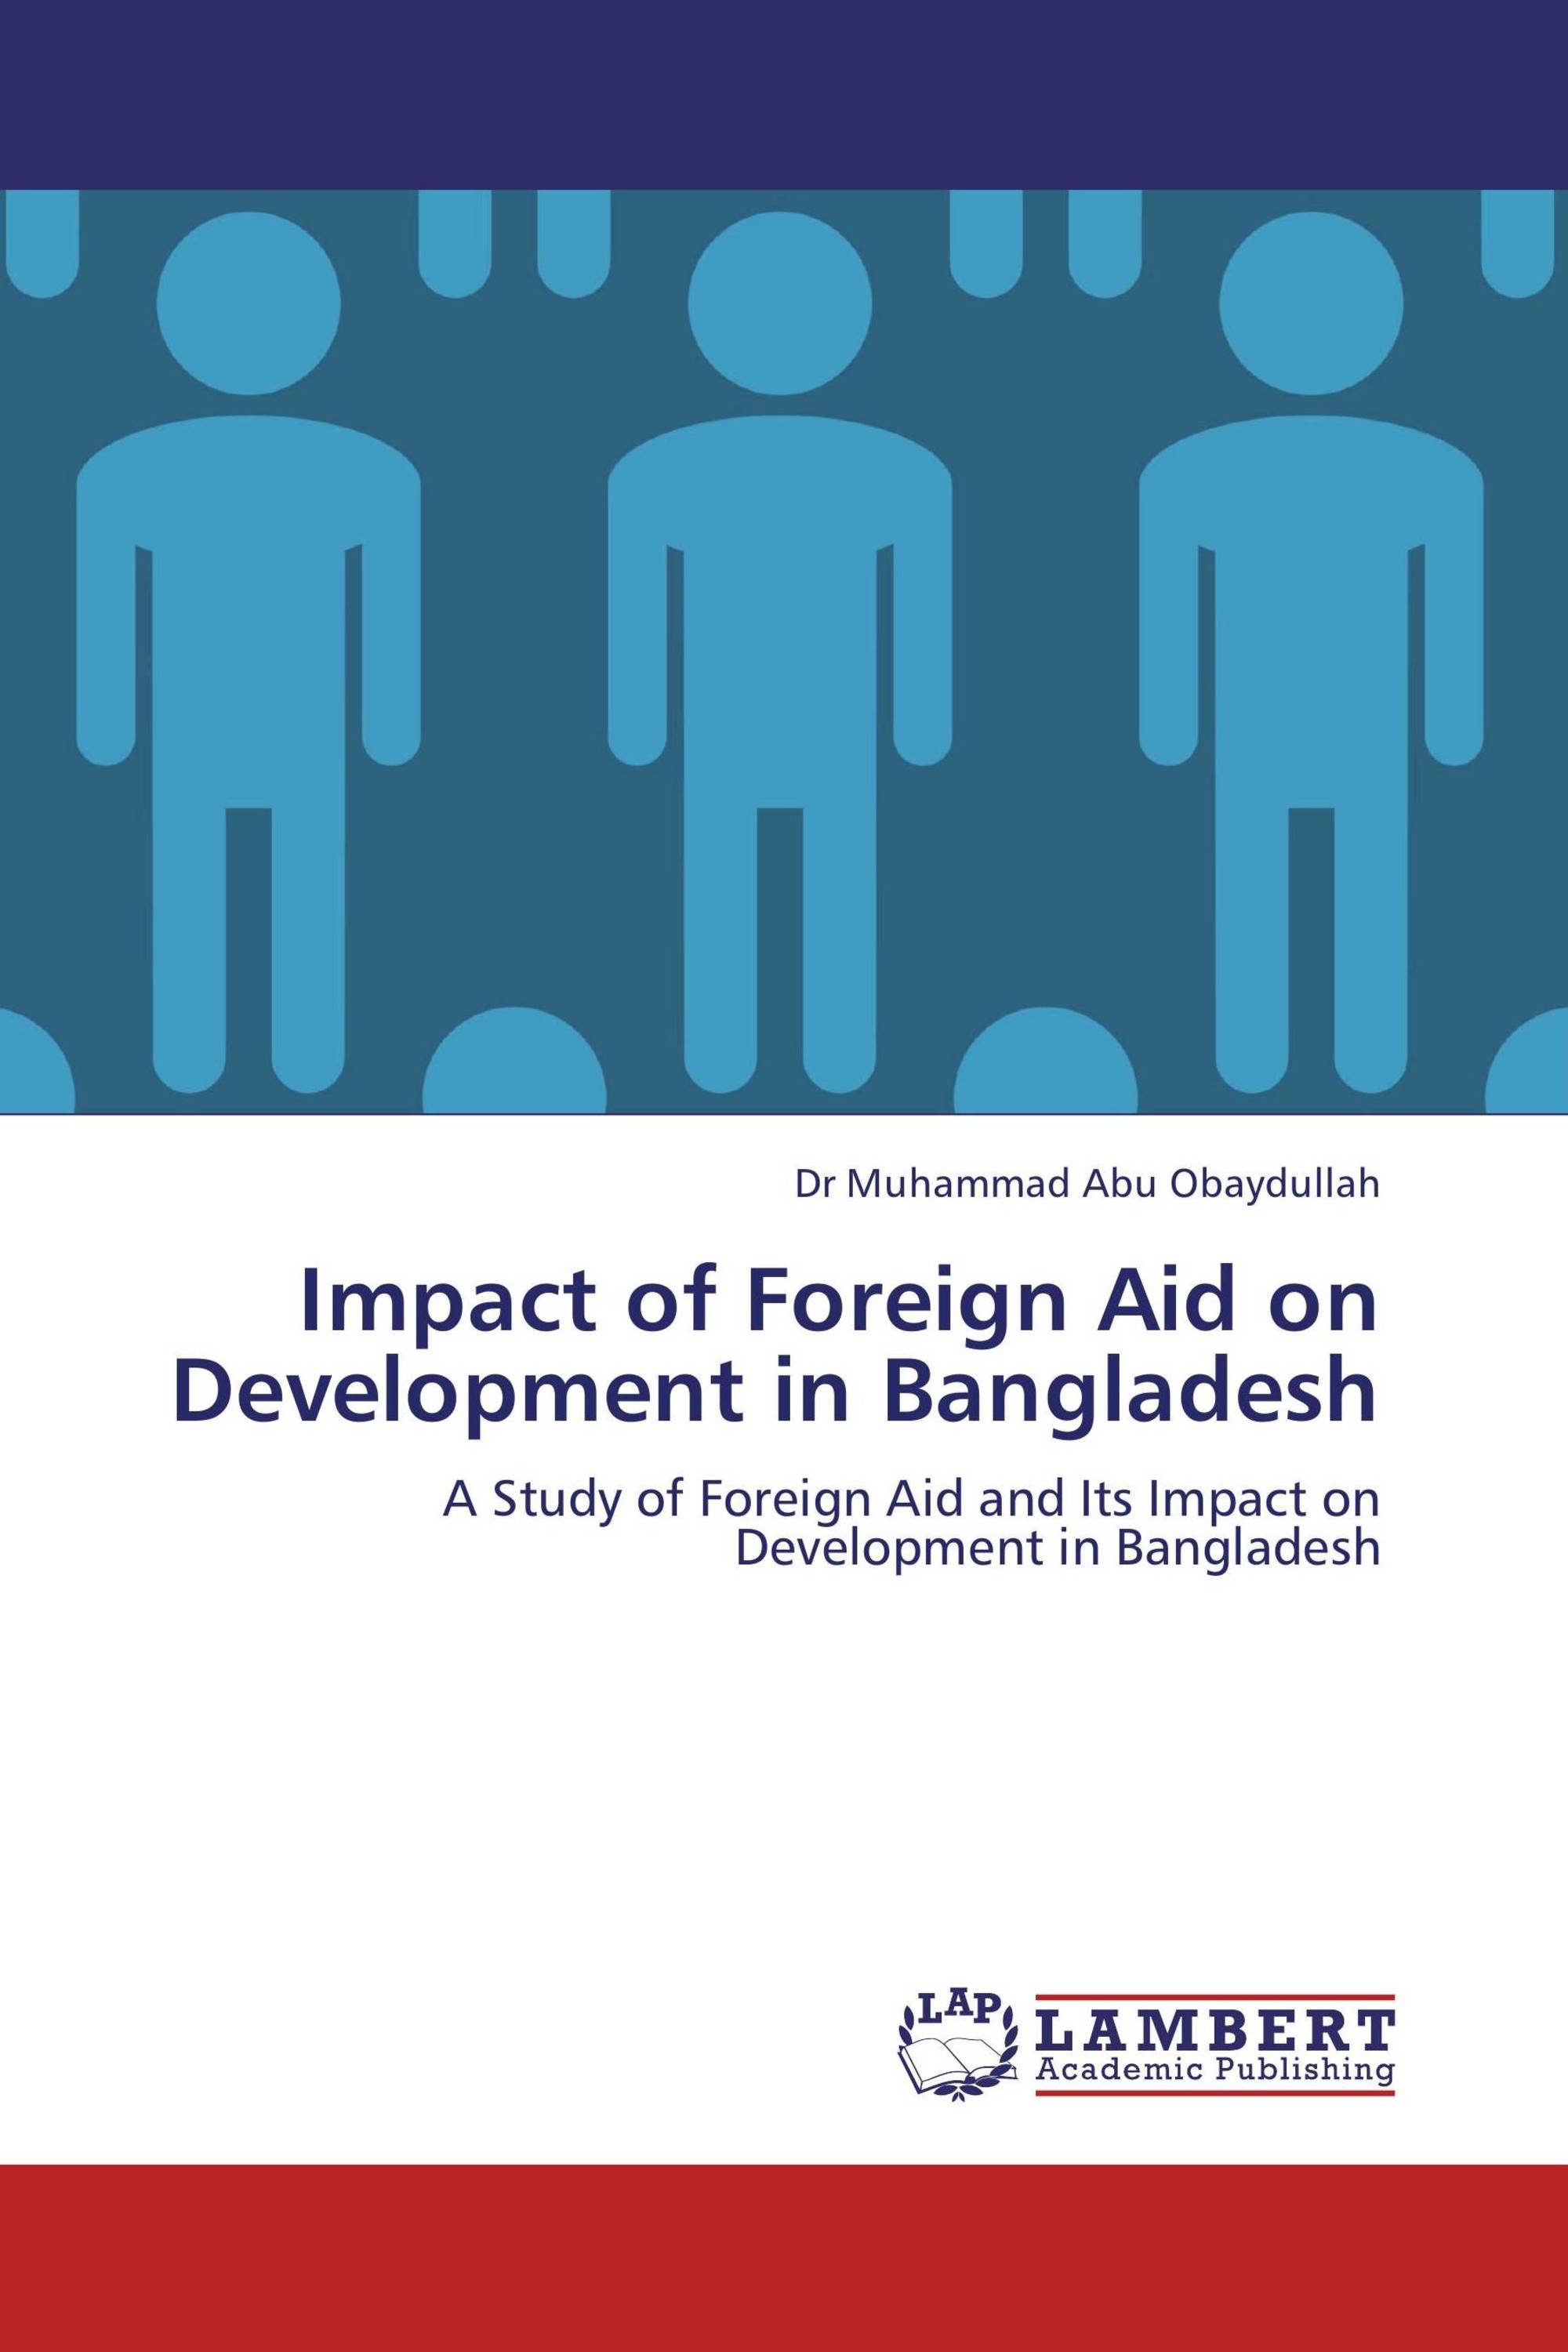 case study of foreign aid